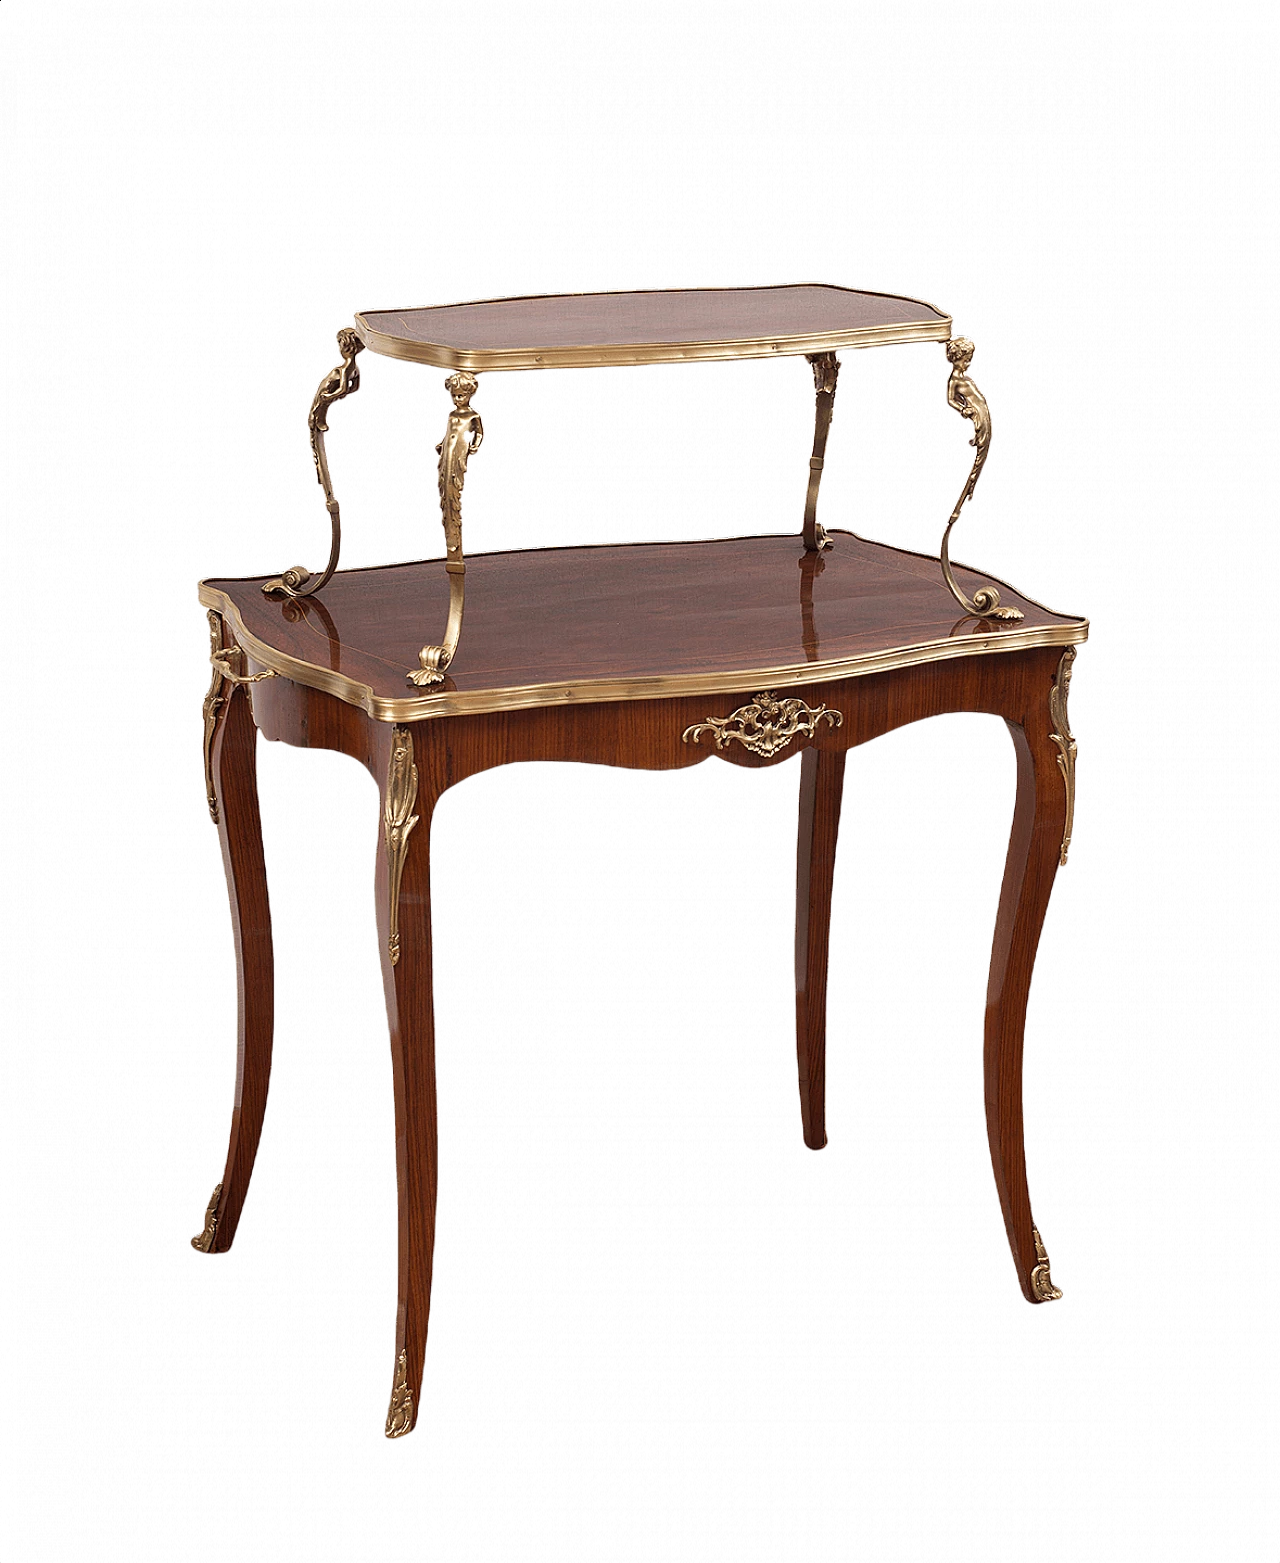 French Napoleon III coffee table in polychrome wood with gilded bronze applications, 19th century 1400872